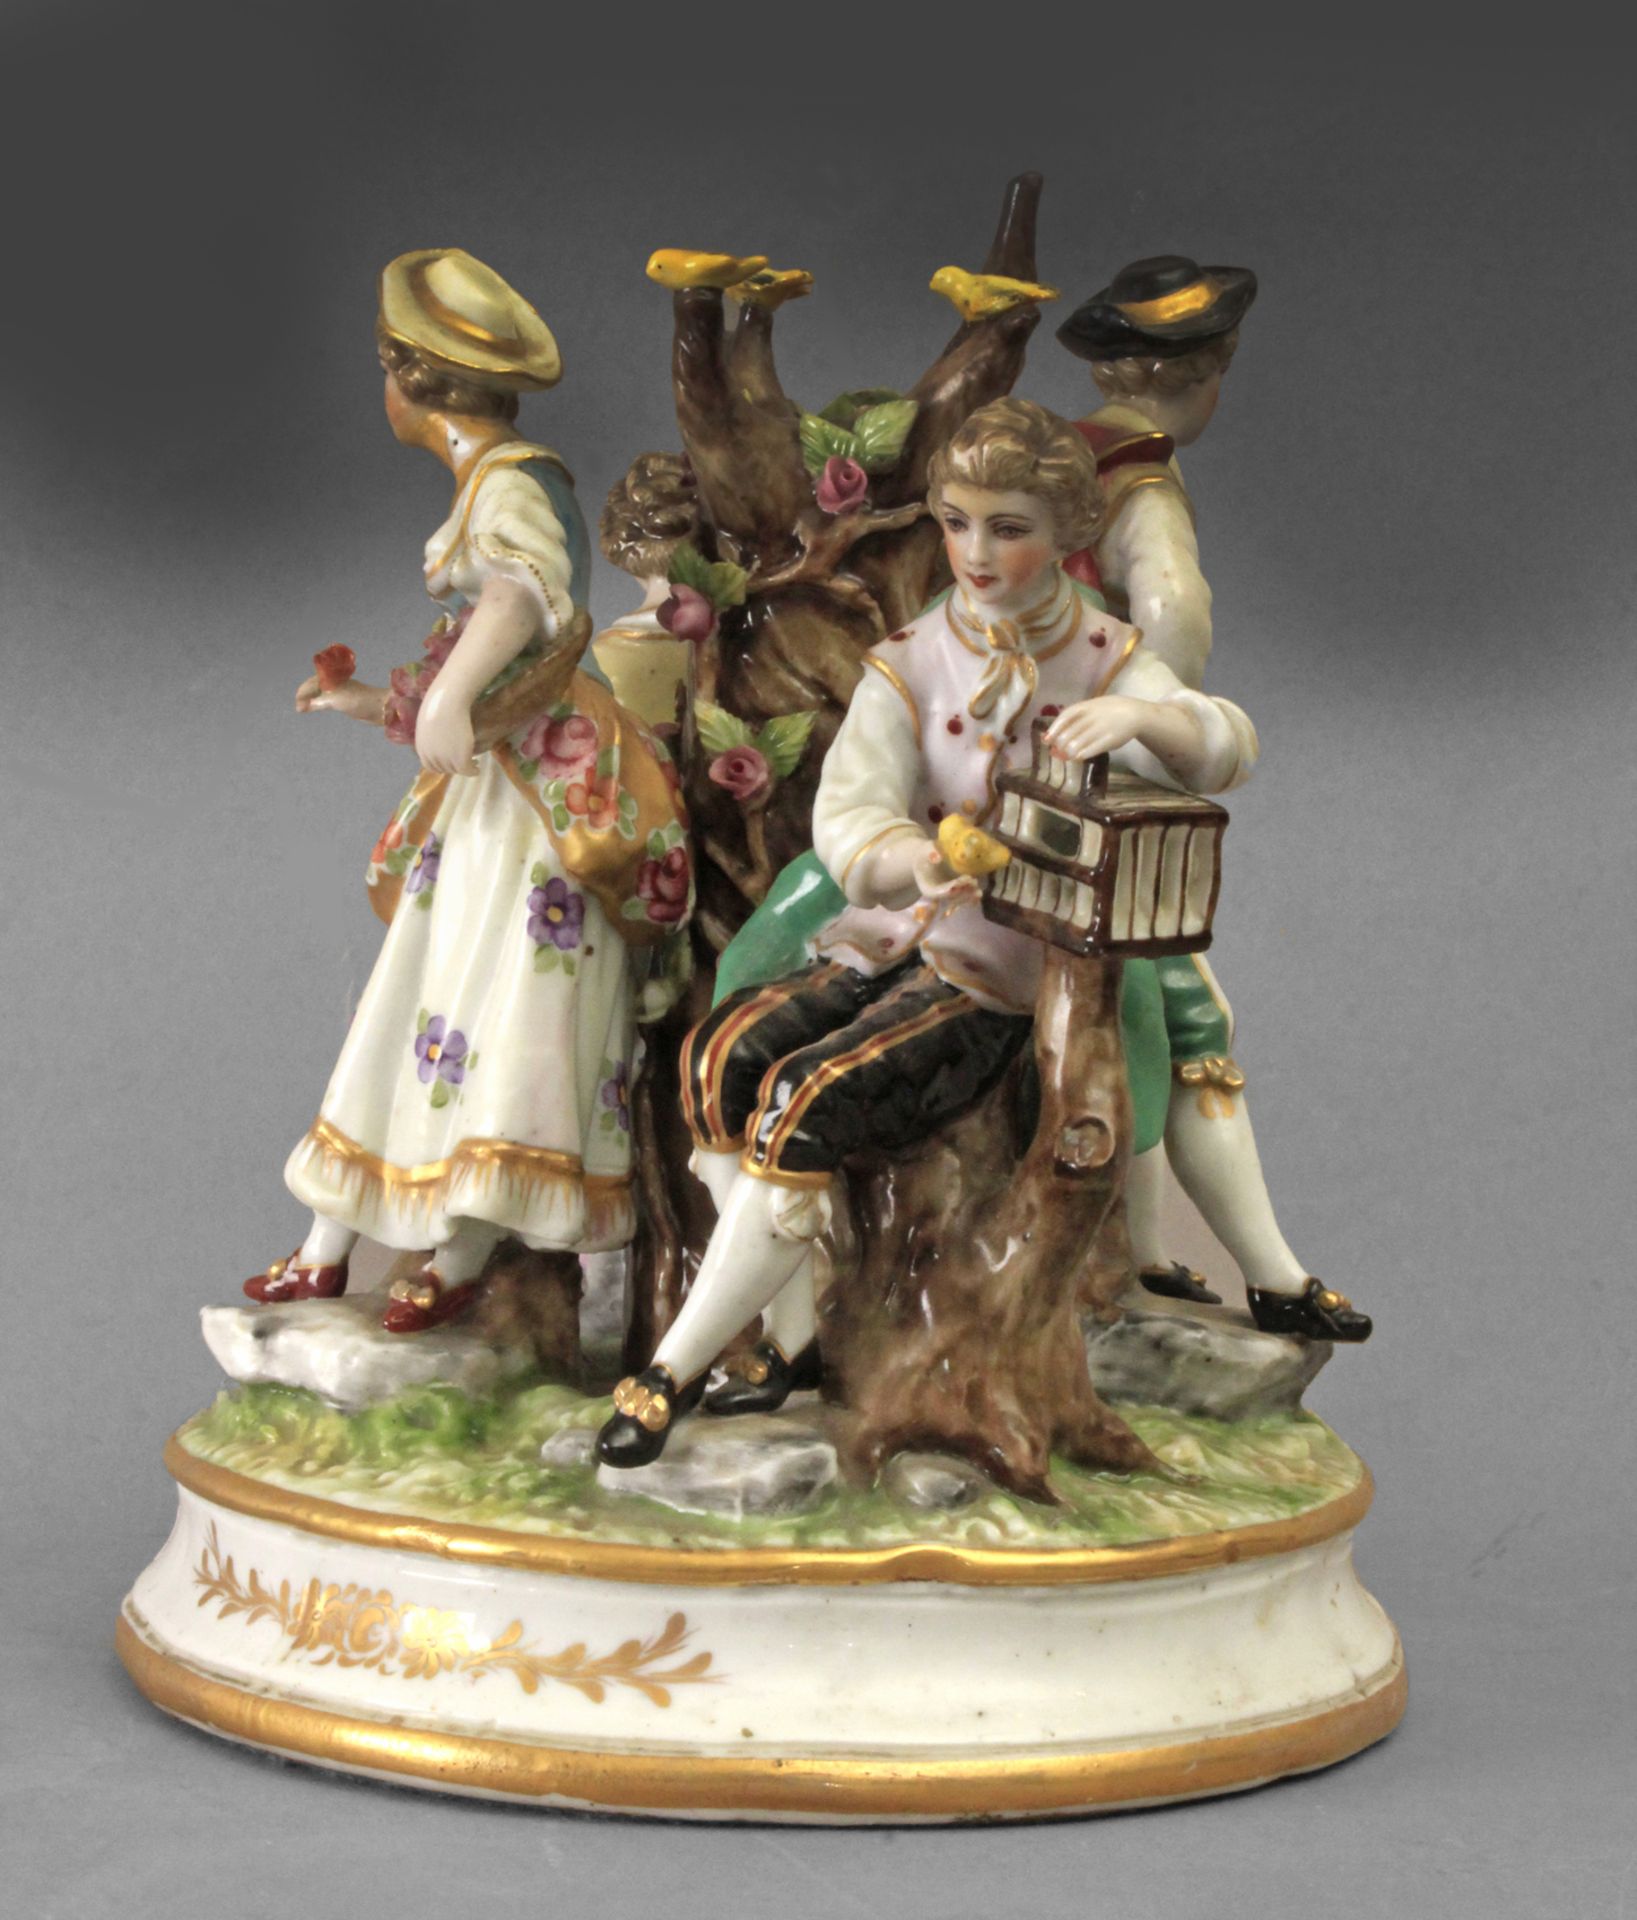 A 19th century group of figurines in European porcelain